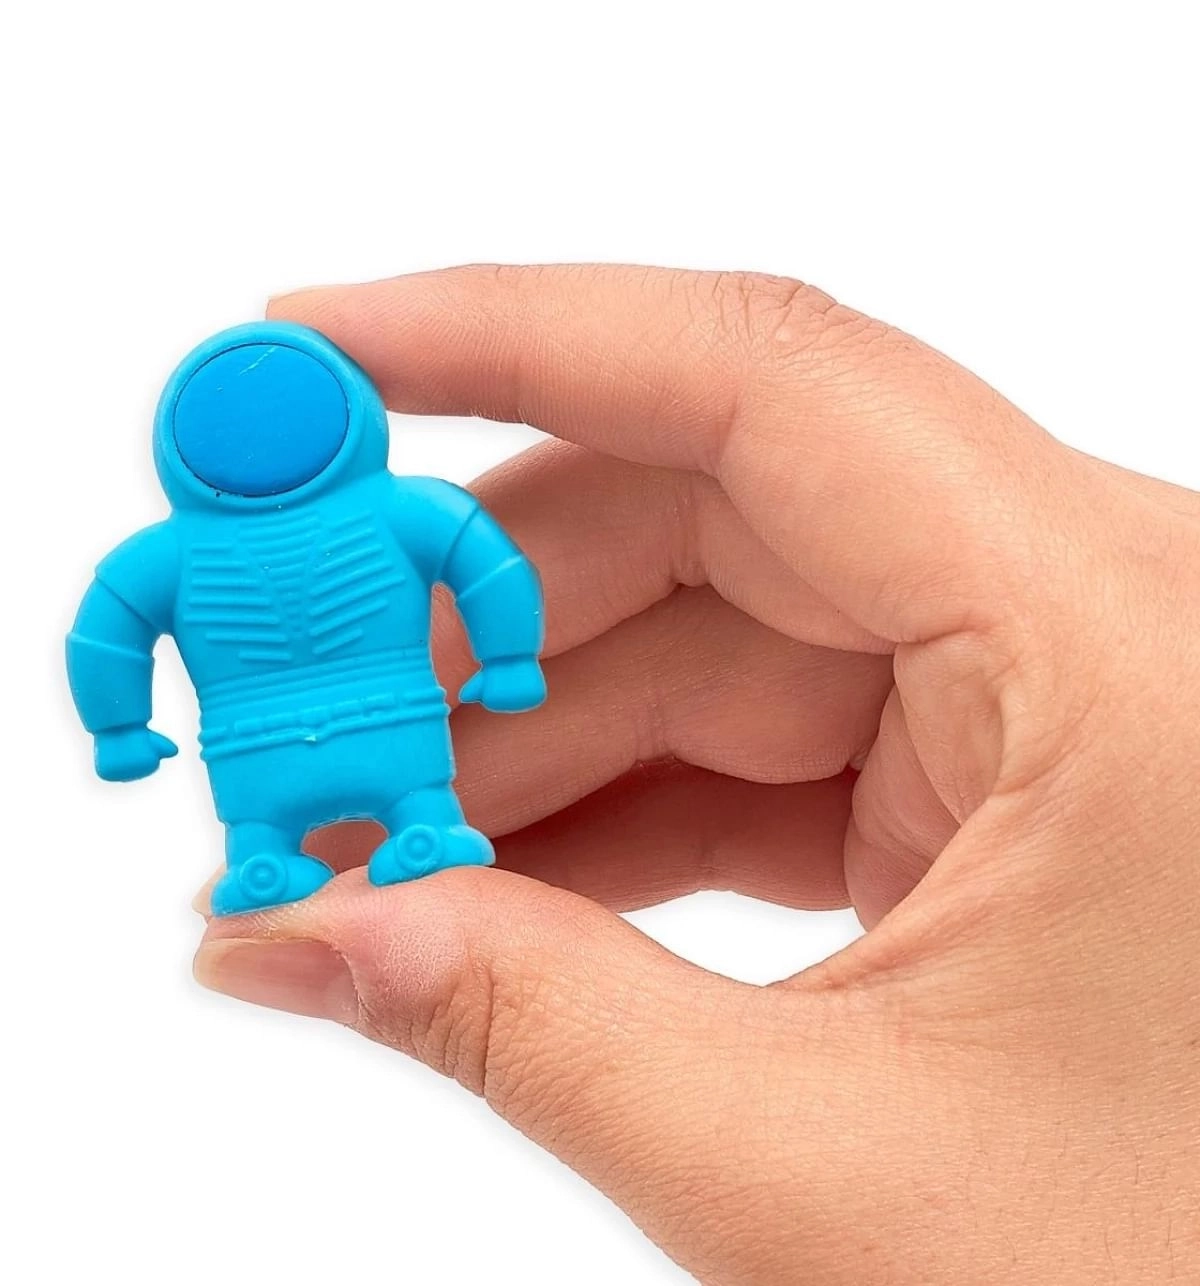 OOLY Astronaut Erasers, Erasers for Art, School, and Office Use, Classroom Set, Set of 3, Blue, 6Y+